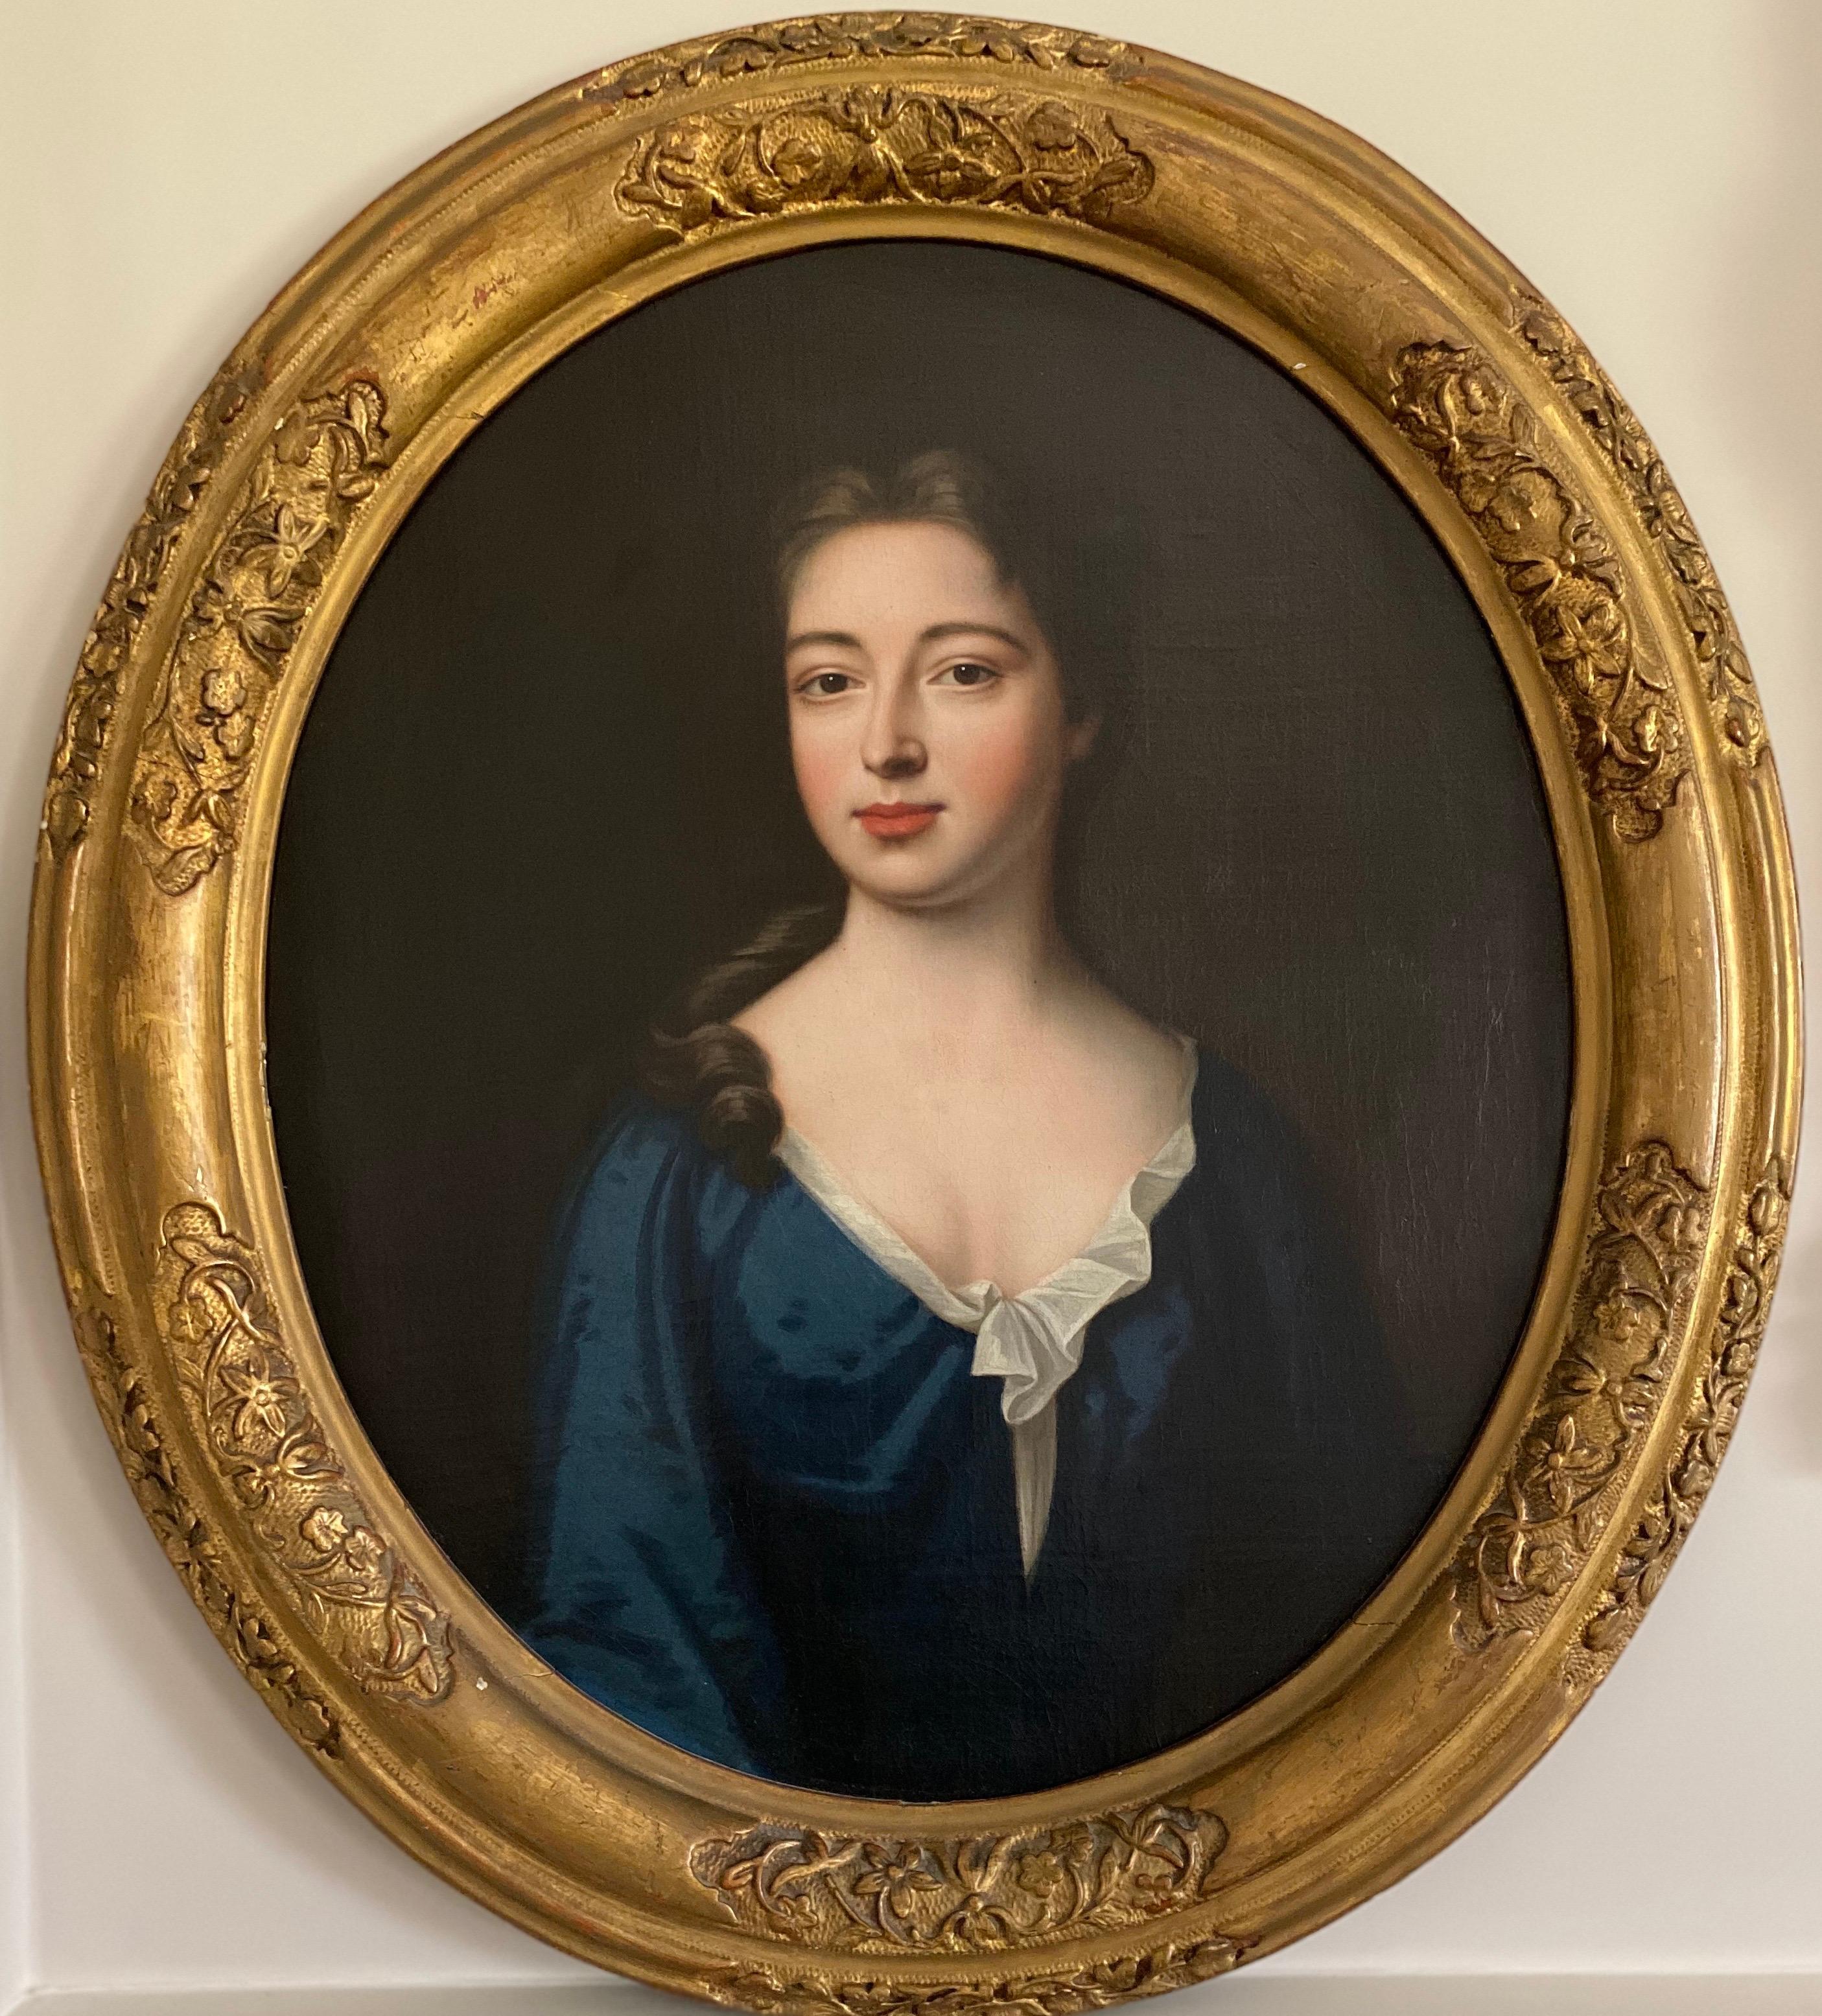 John Verelst Portrait Painting - Early 18th century portrait of a Lady in a blue gown, dated 1710.